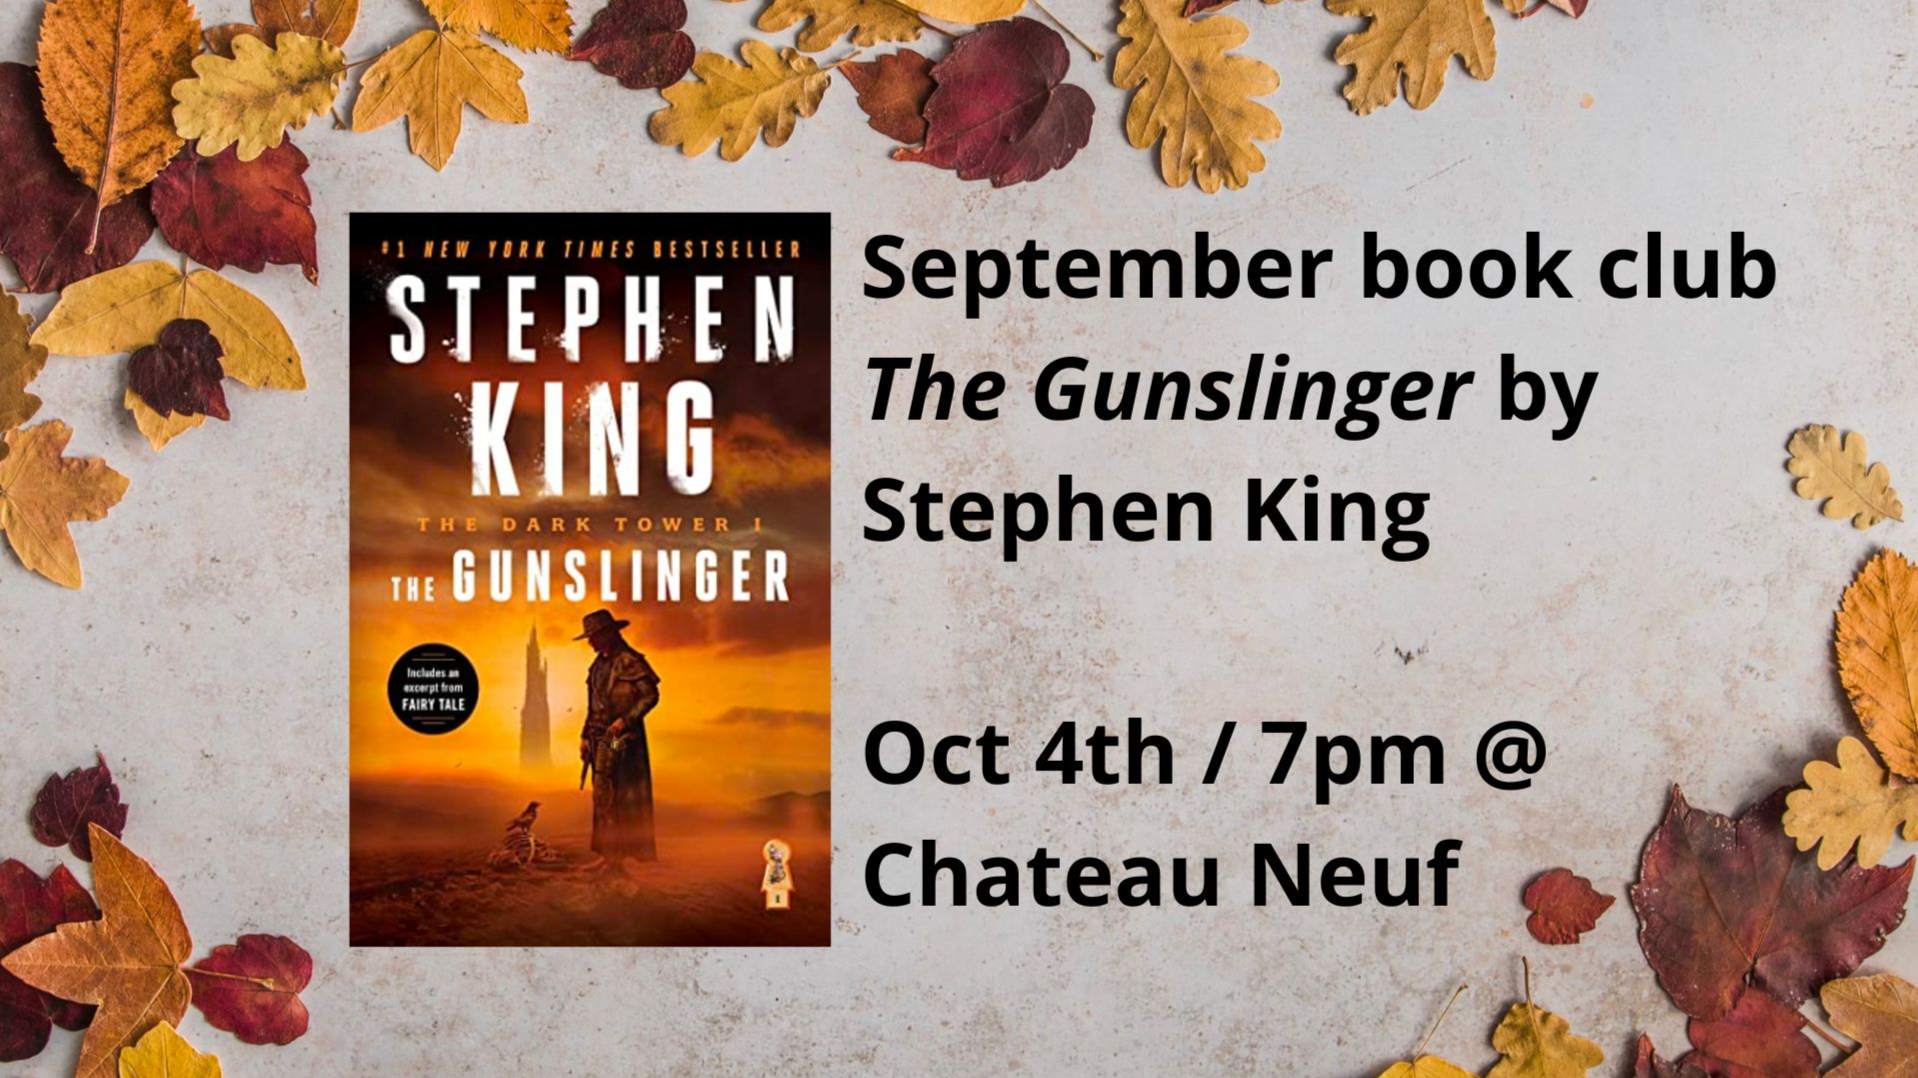 Picture of "The Gunslinger" book cover and info about when and where meeting will take place